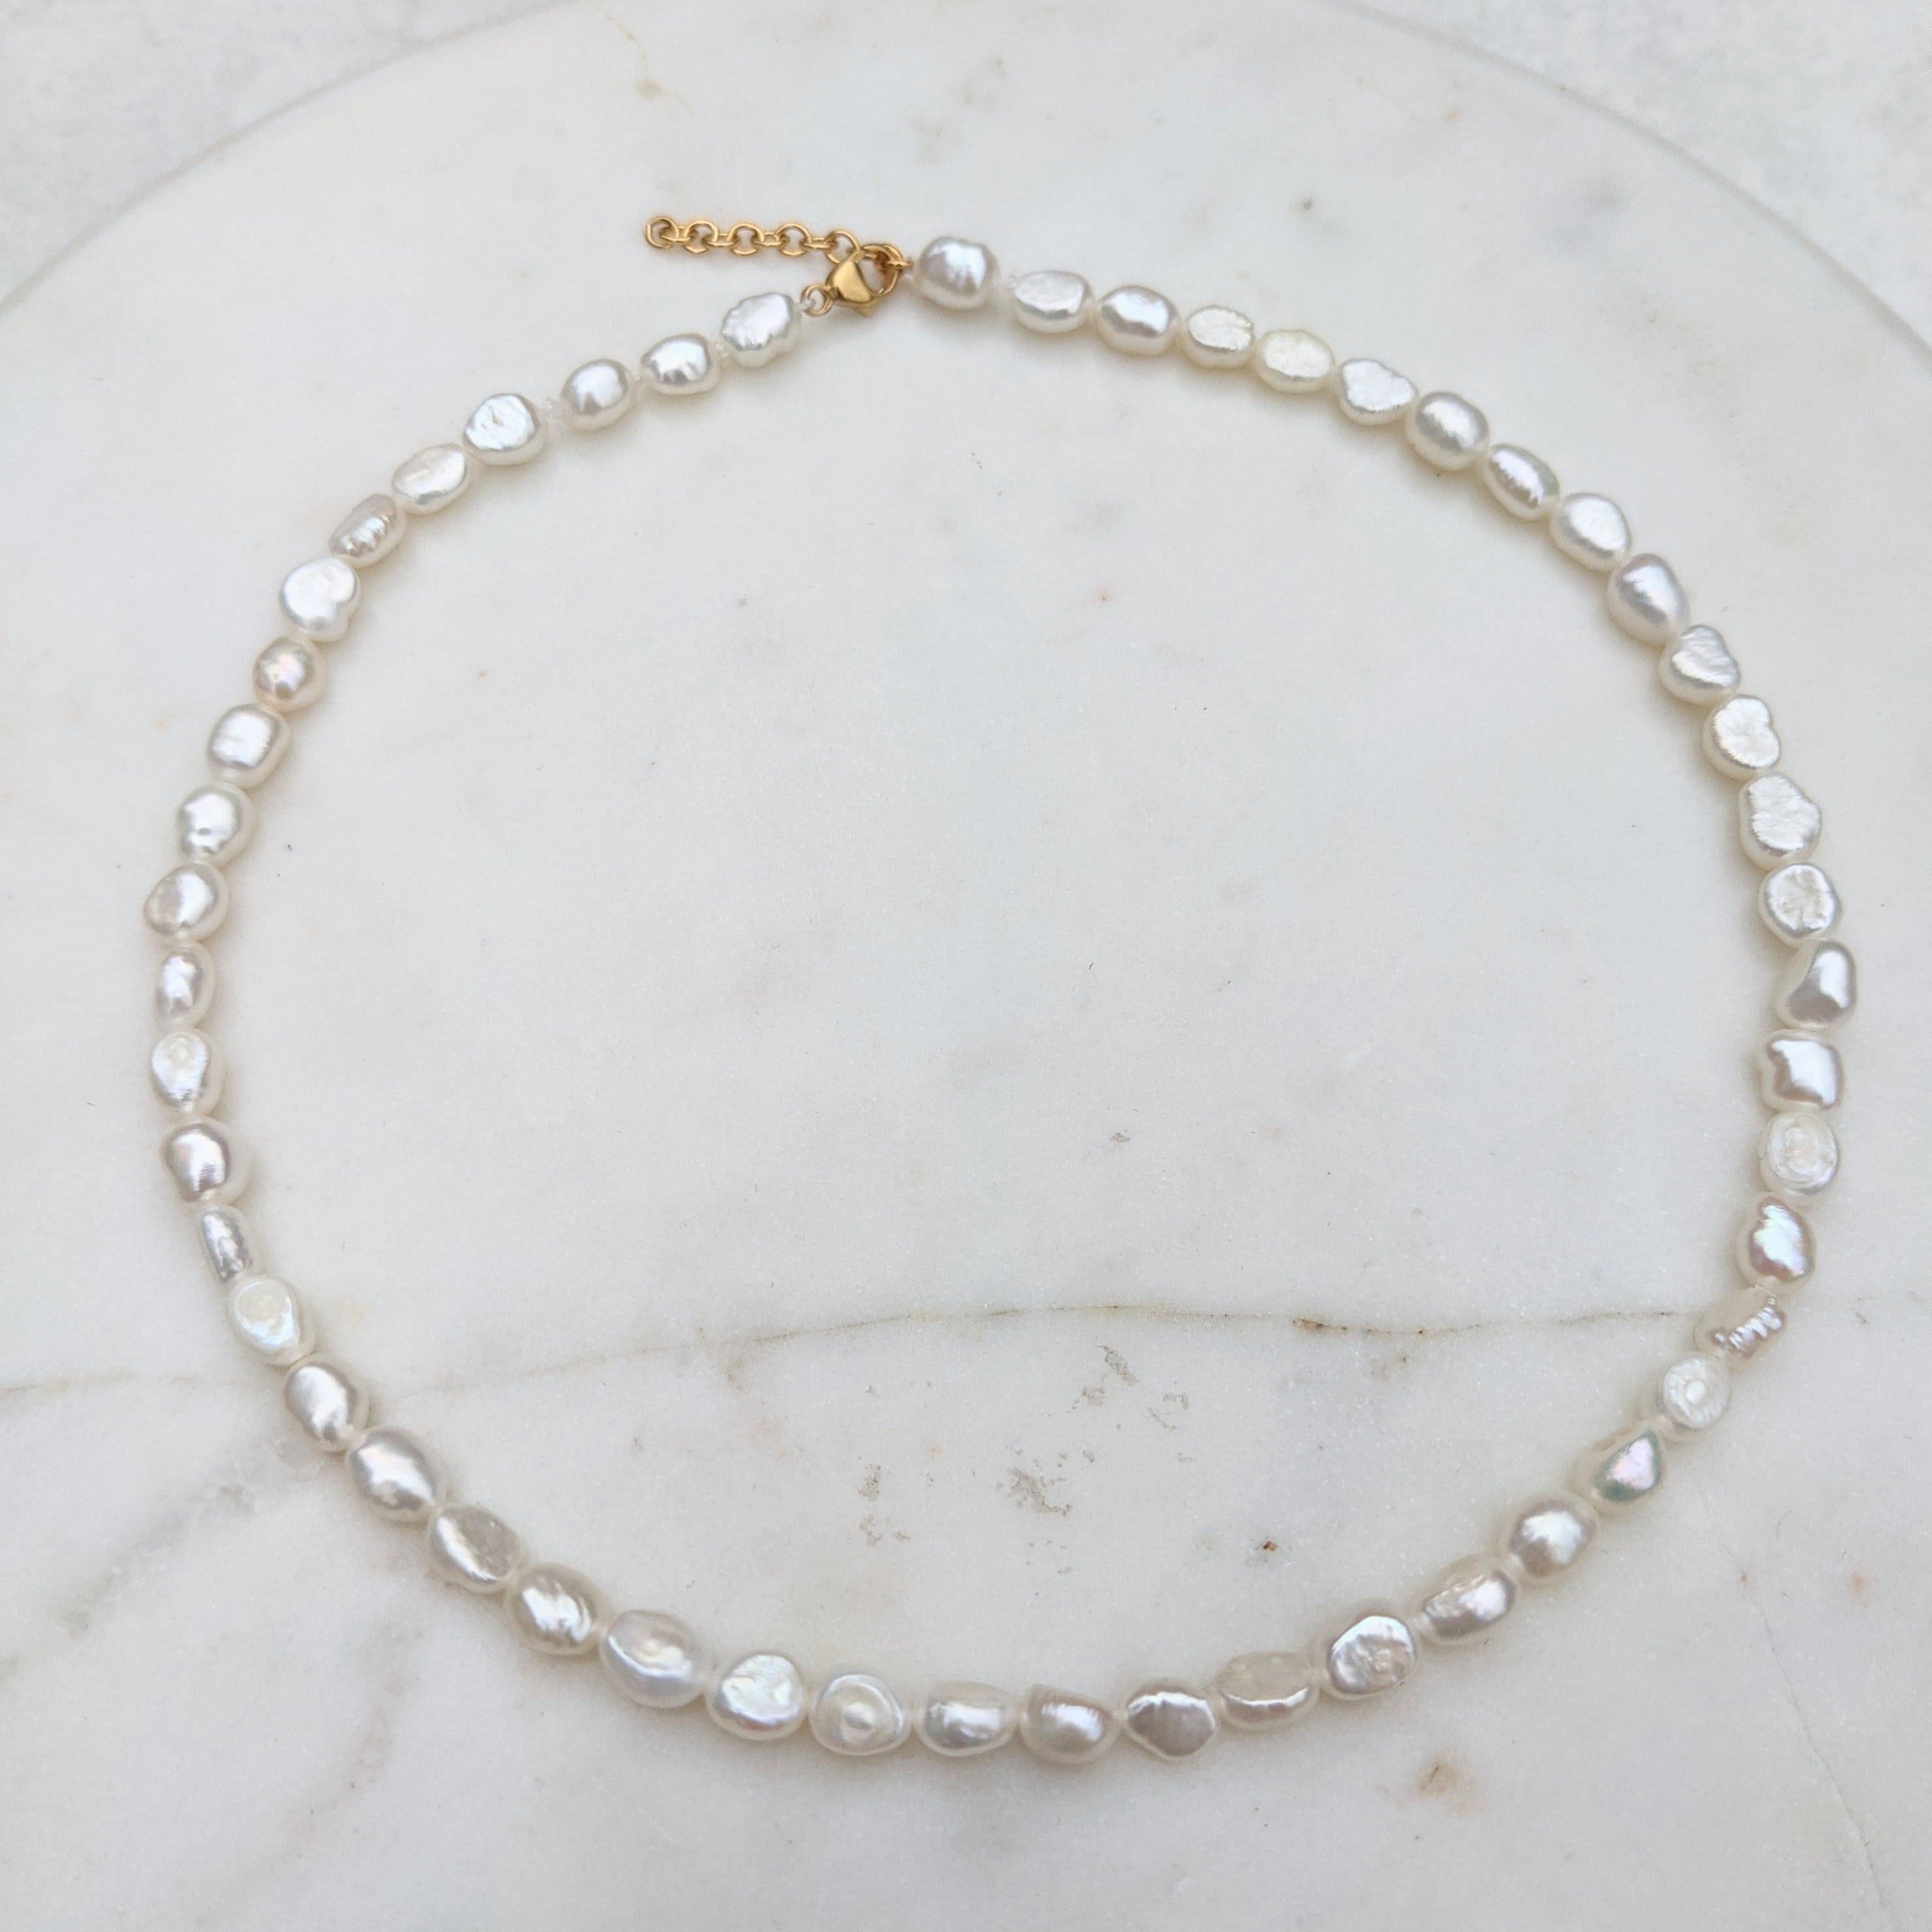 Pearl choker necklace made with small baroque irregular seed with gold filled adjustable clasp